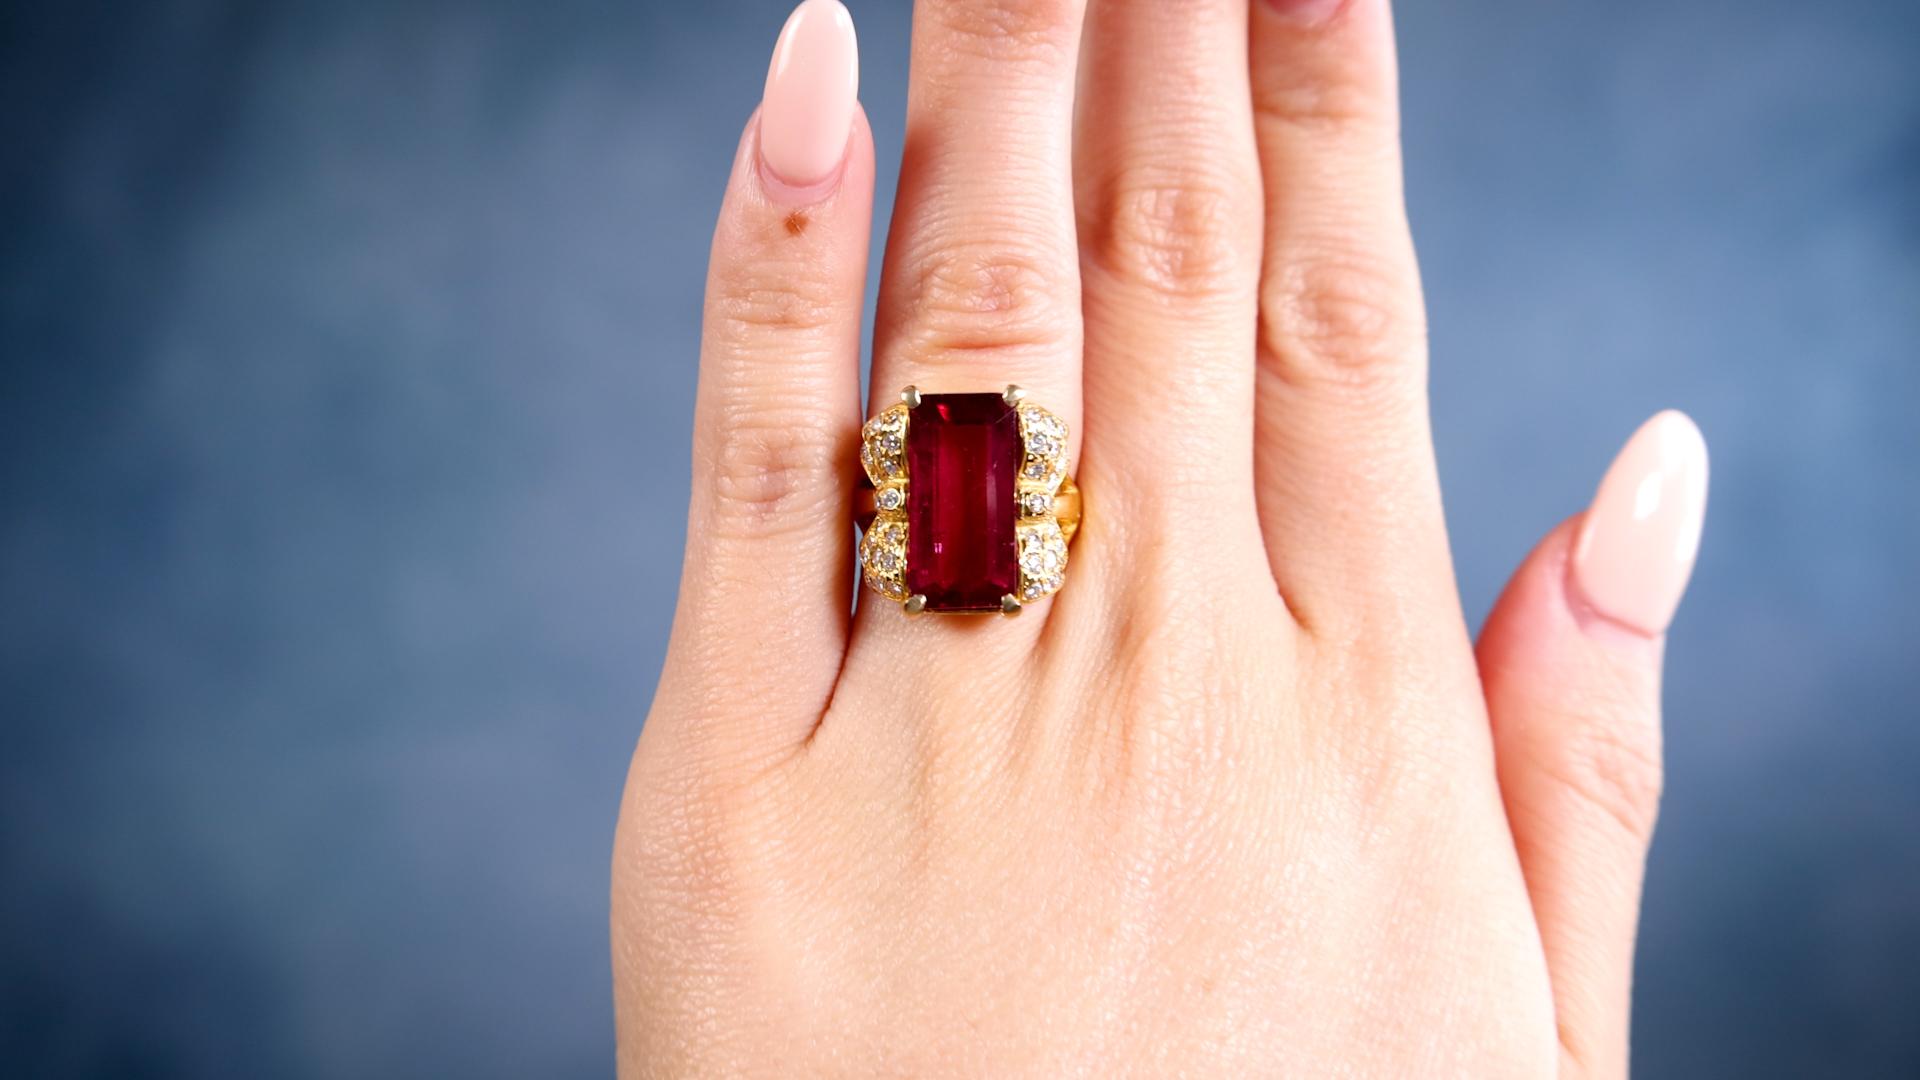 One Rubellite Diamond 18k Yellow Gold Ring. Featuring one octagonal step cut rubellite of 6.42 carats. Accented by 40 round brilliant cut diamonds with a total weight of 0.54 carat, graded near-colorless, VS clarity. Crafted in 18 karat yellow gold